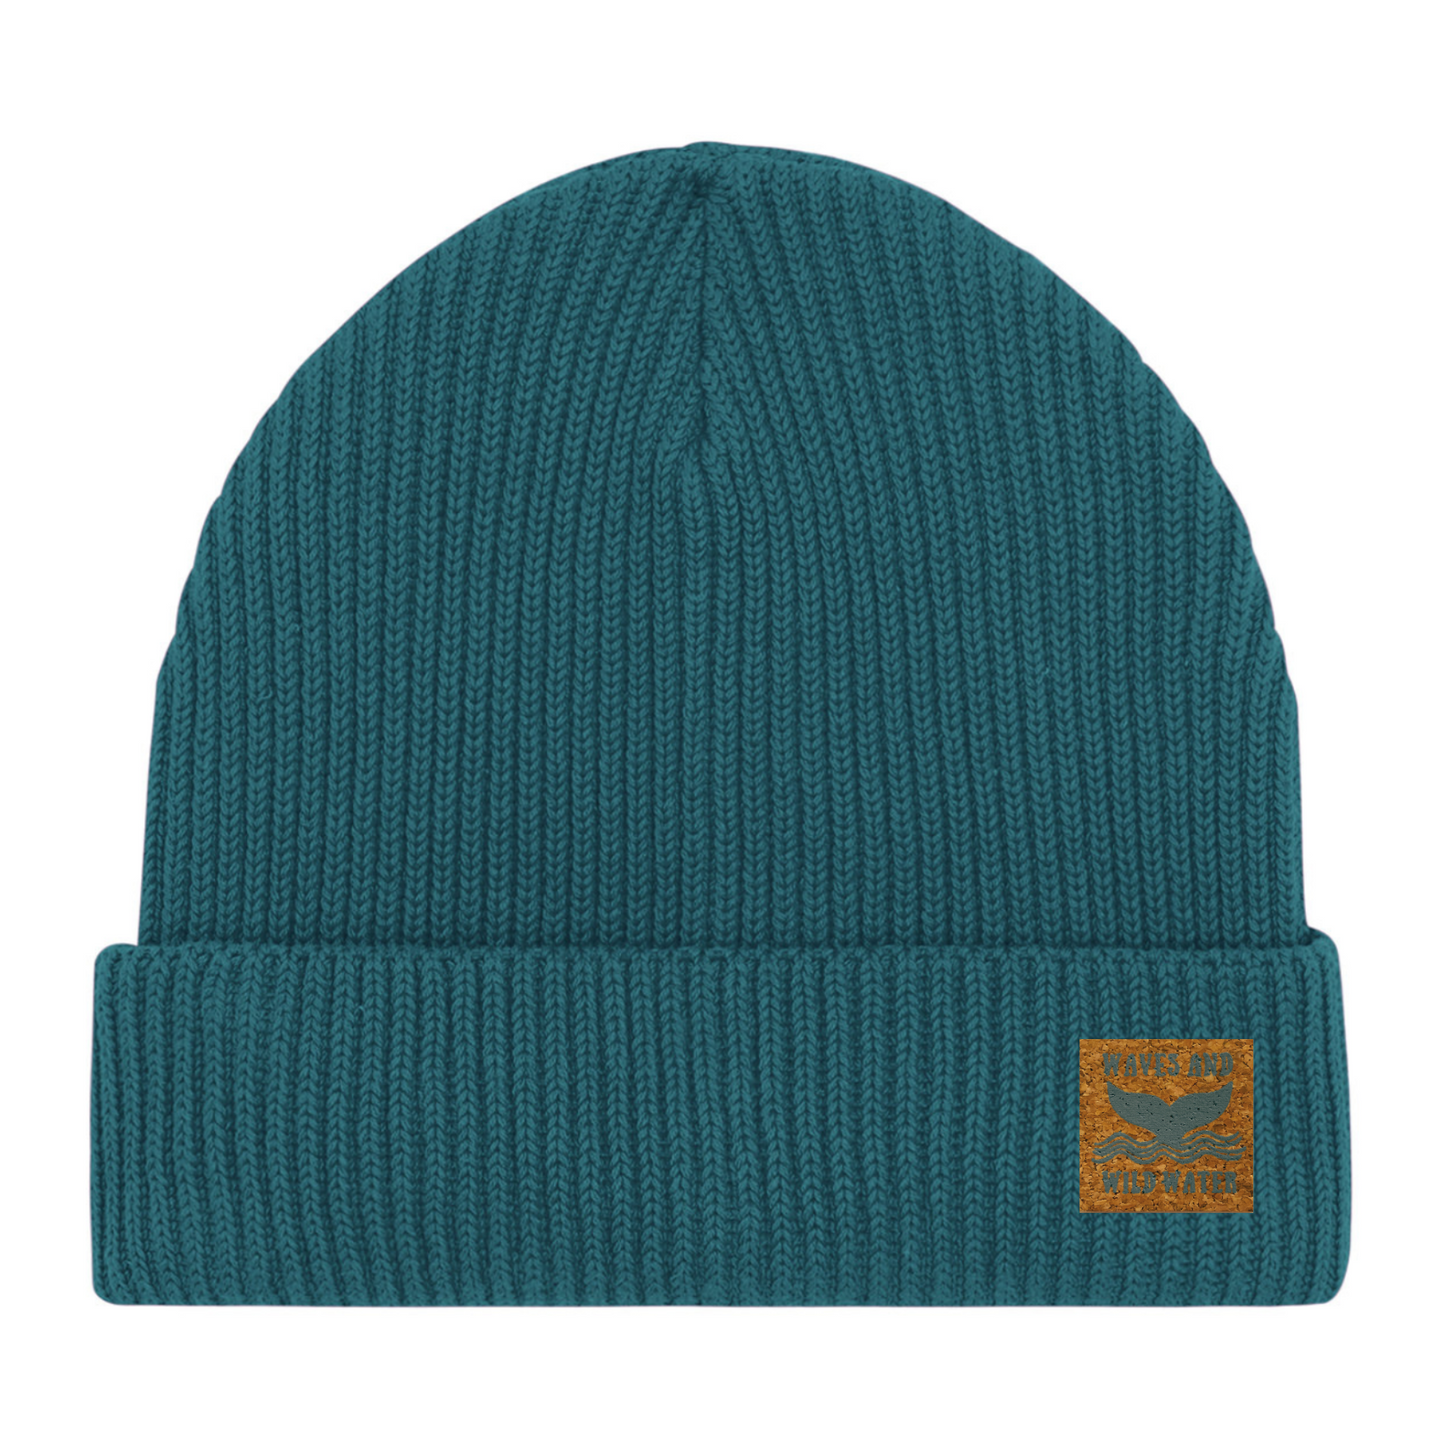 A teal green fisherman beanie hat with a Waves & Wild Water label. 